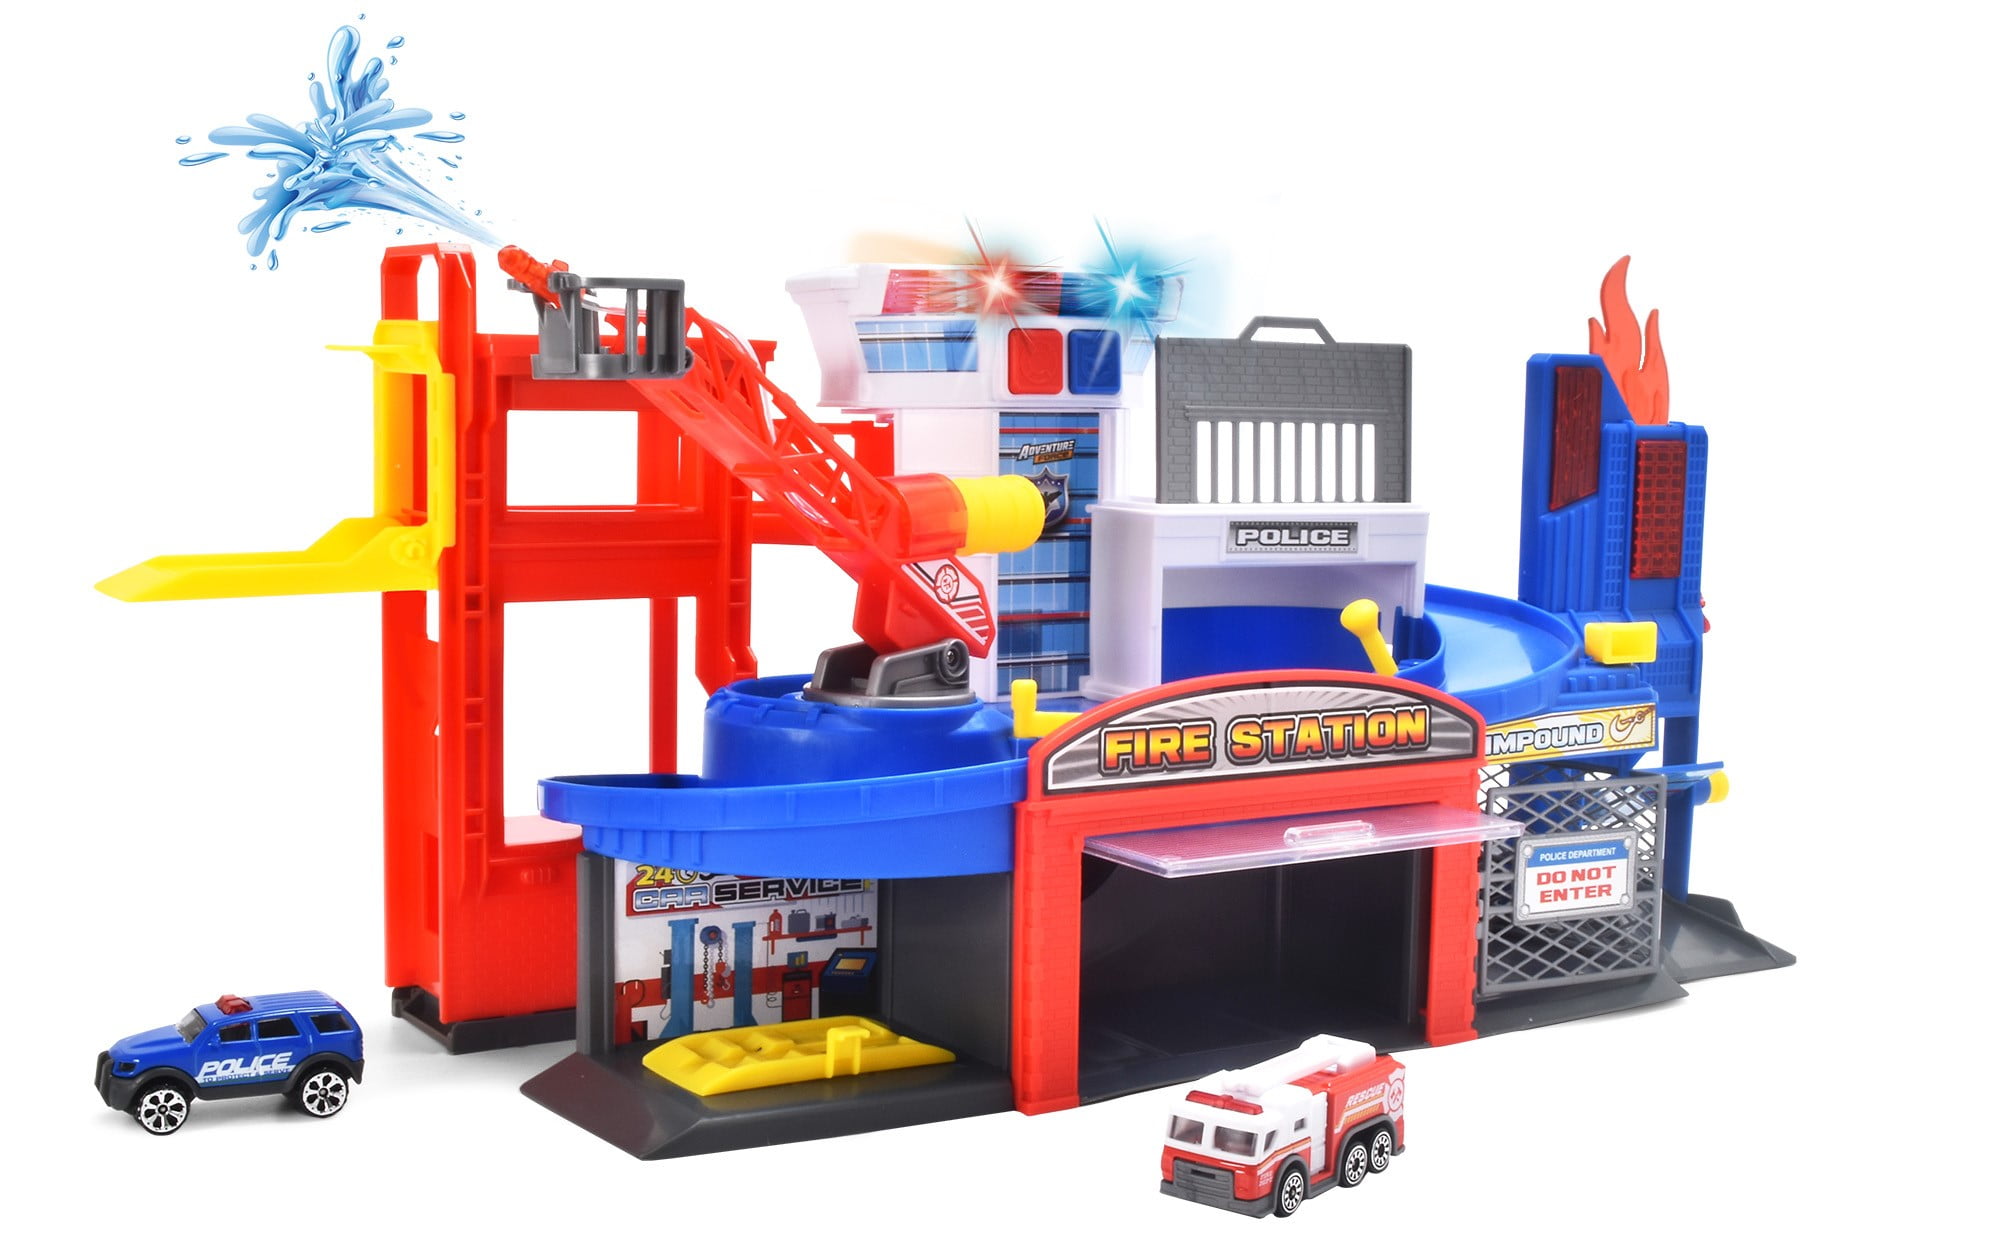 Adventure Force Fire and Rescue Station Die-Cast Vehicle Playset, Ages 3+